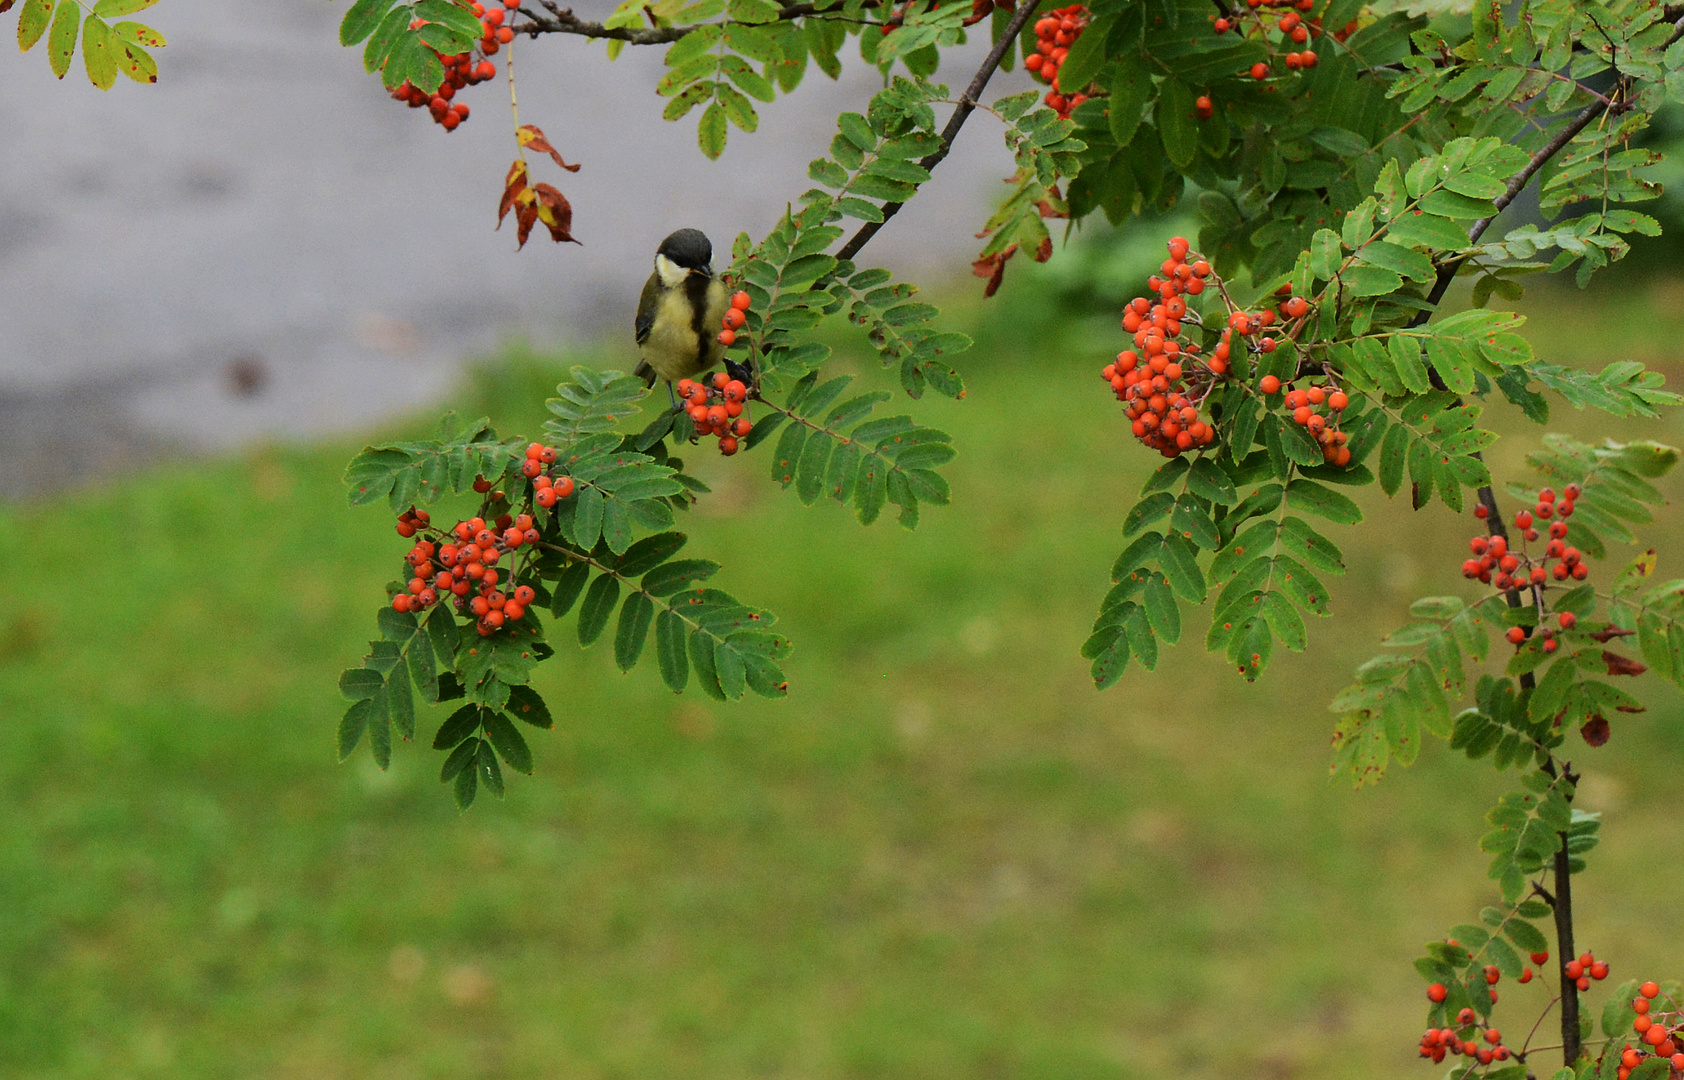 The great tit (Parus major) on Sorbus